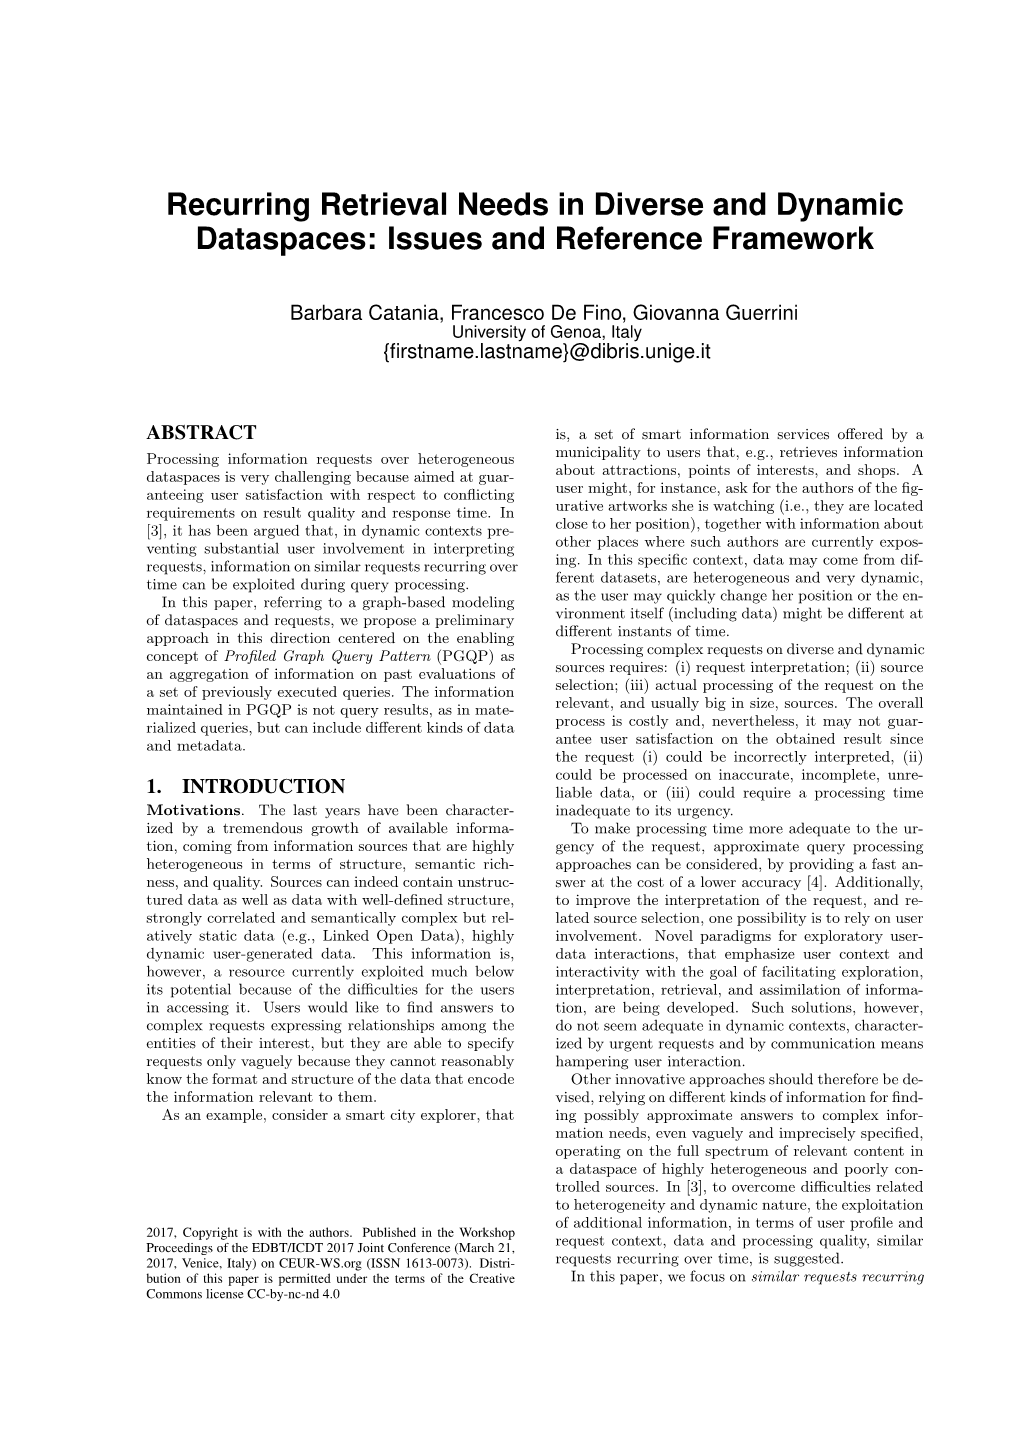 Recurring Retrieval Needs in Diverse and Dynamic Dataspaces: Issues and Reference Framework